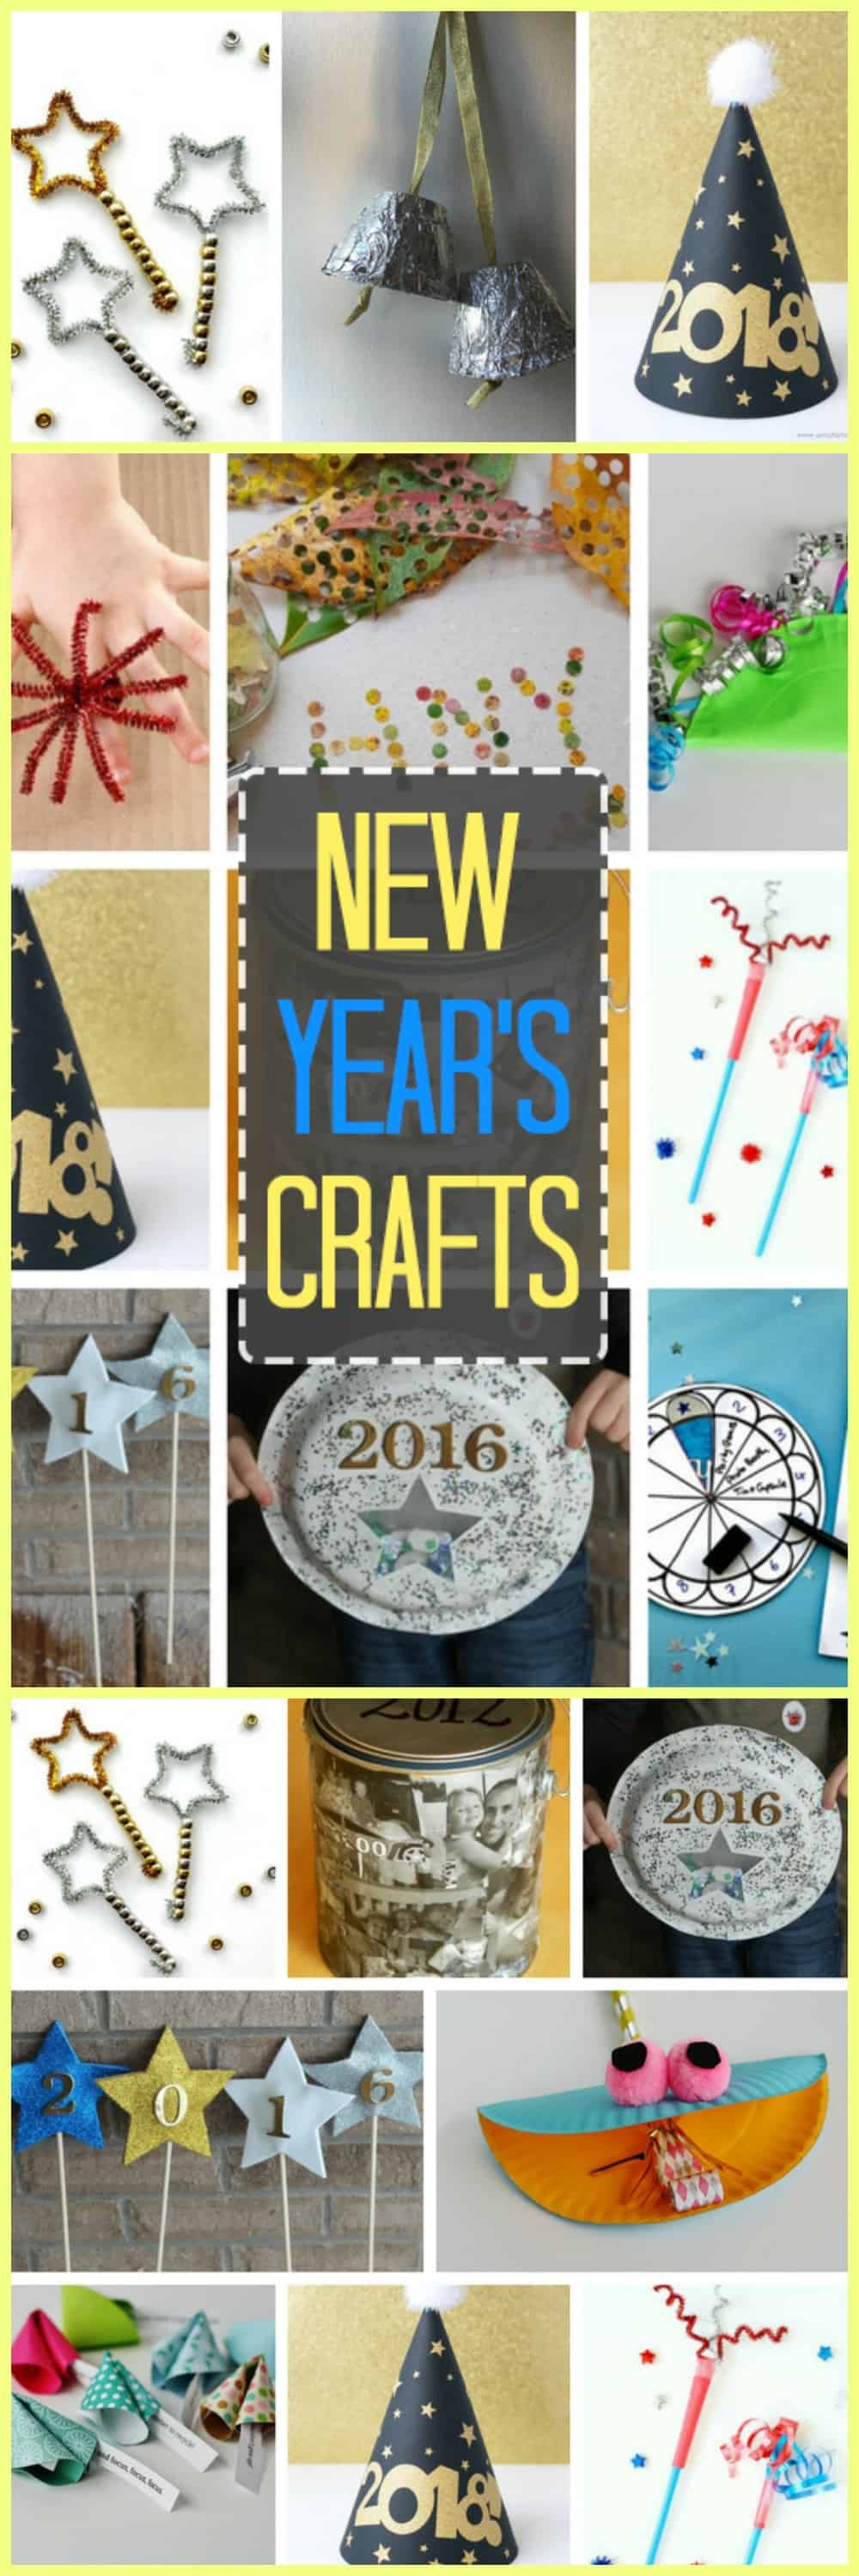 A fun way to build up excitement is to make some homemade New Year's crafts and talk about your favorite parts of the past year and what you're most looking forward to for the next year.